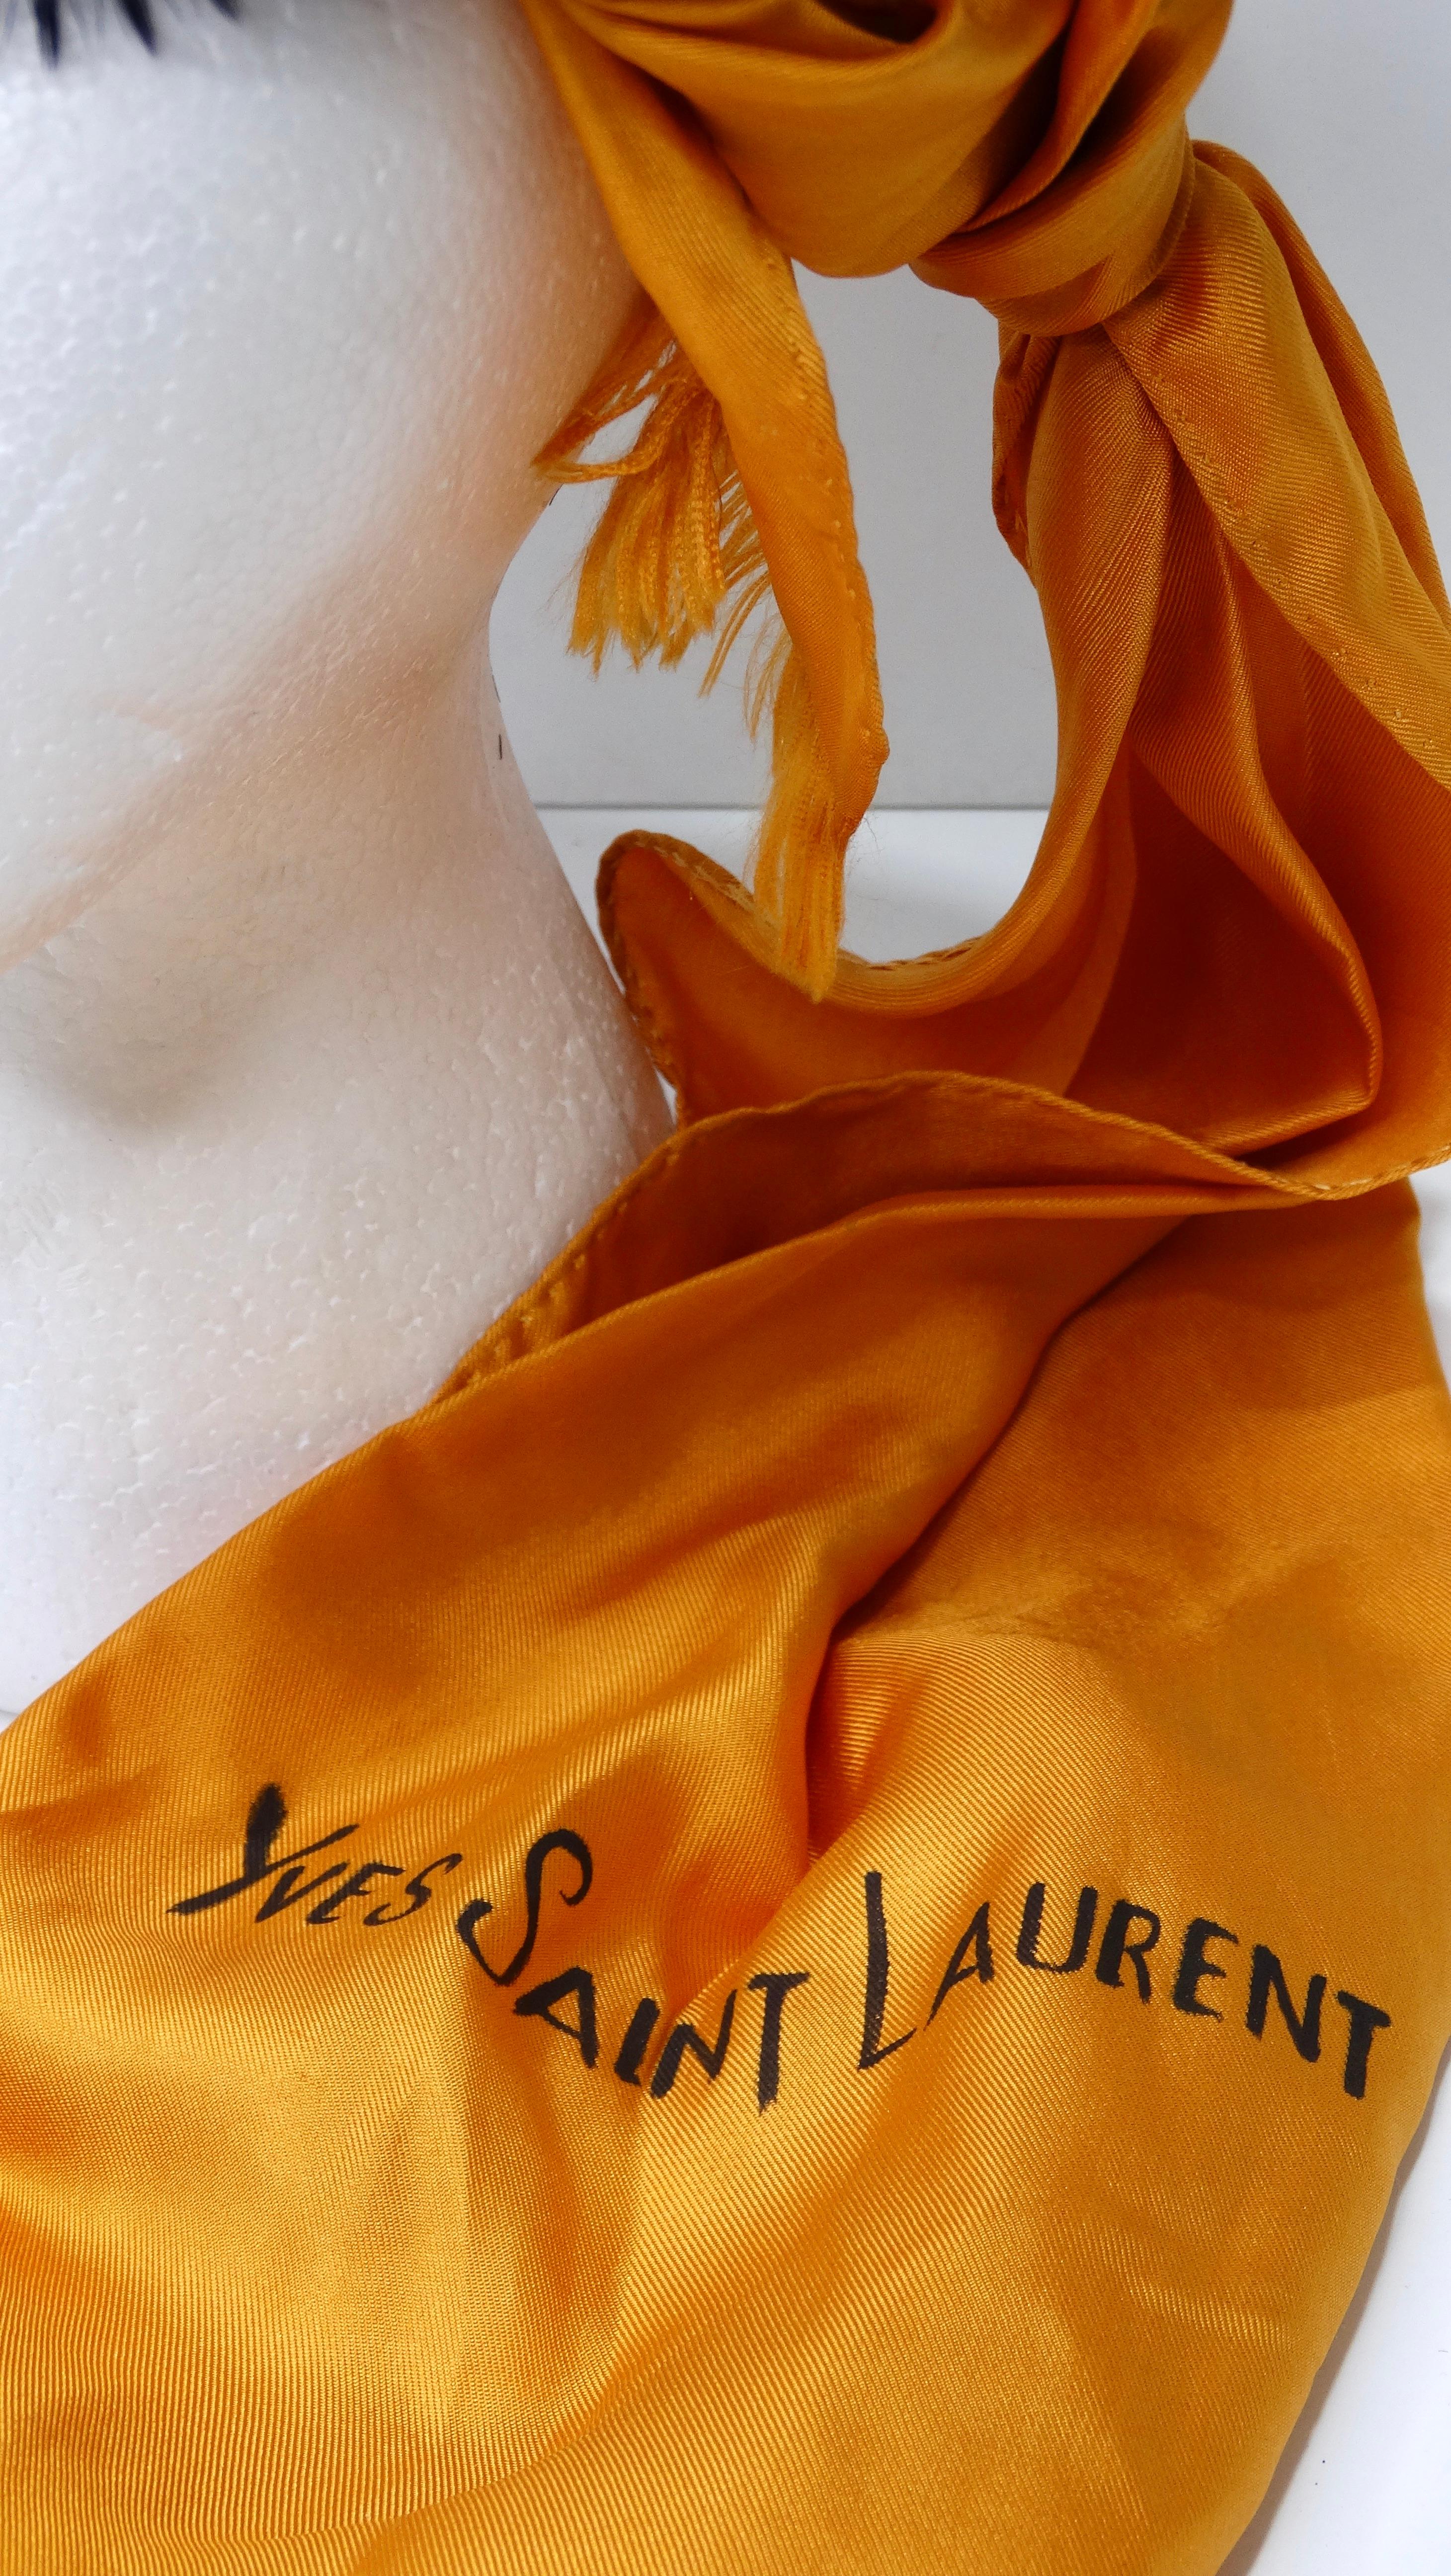 Amp up your accessory collection with this cool Yves Saint Laurent hat with a beautiful orange silk scarf with a unique tied-on look! This wonderfully elegant and rare Yves saint Laurent orange jacquard silk hand-stiched orange scarf is accented